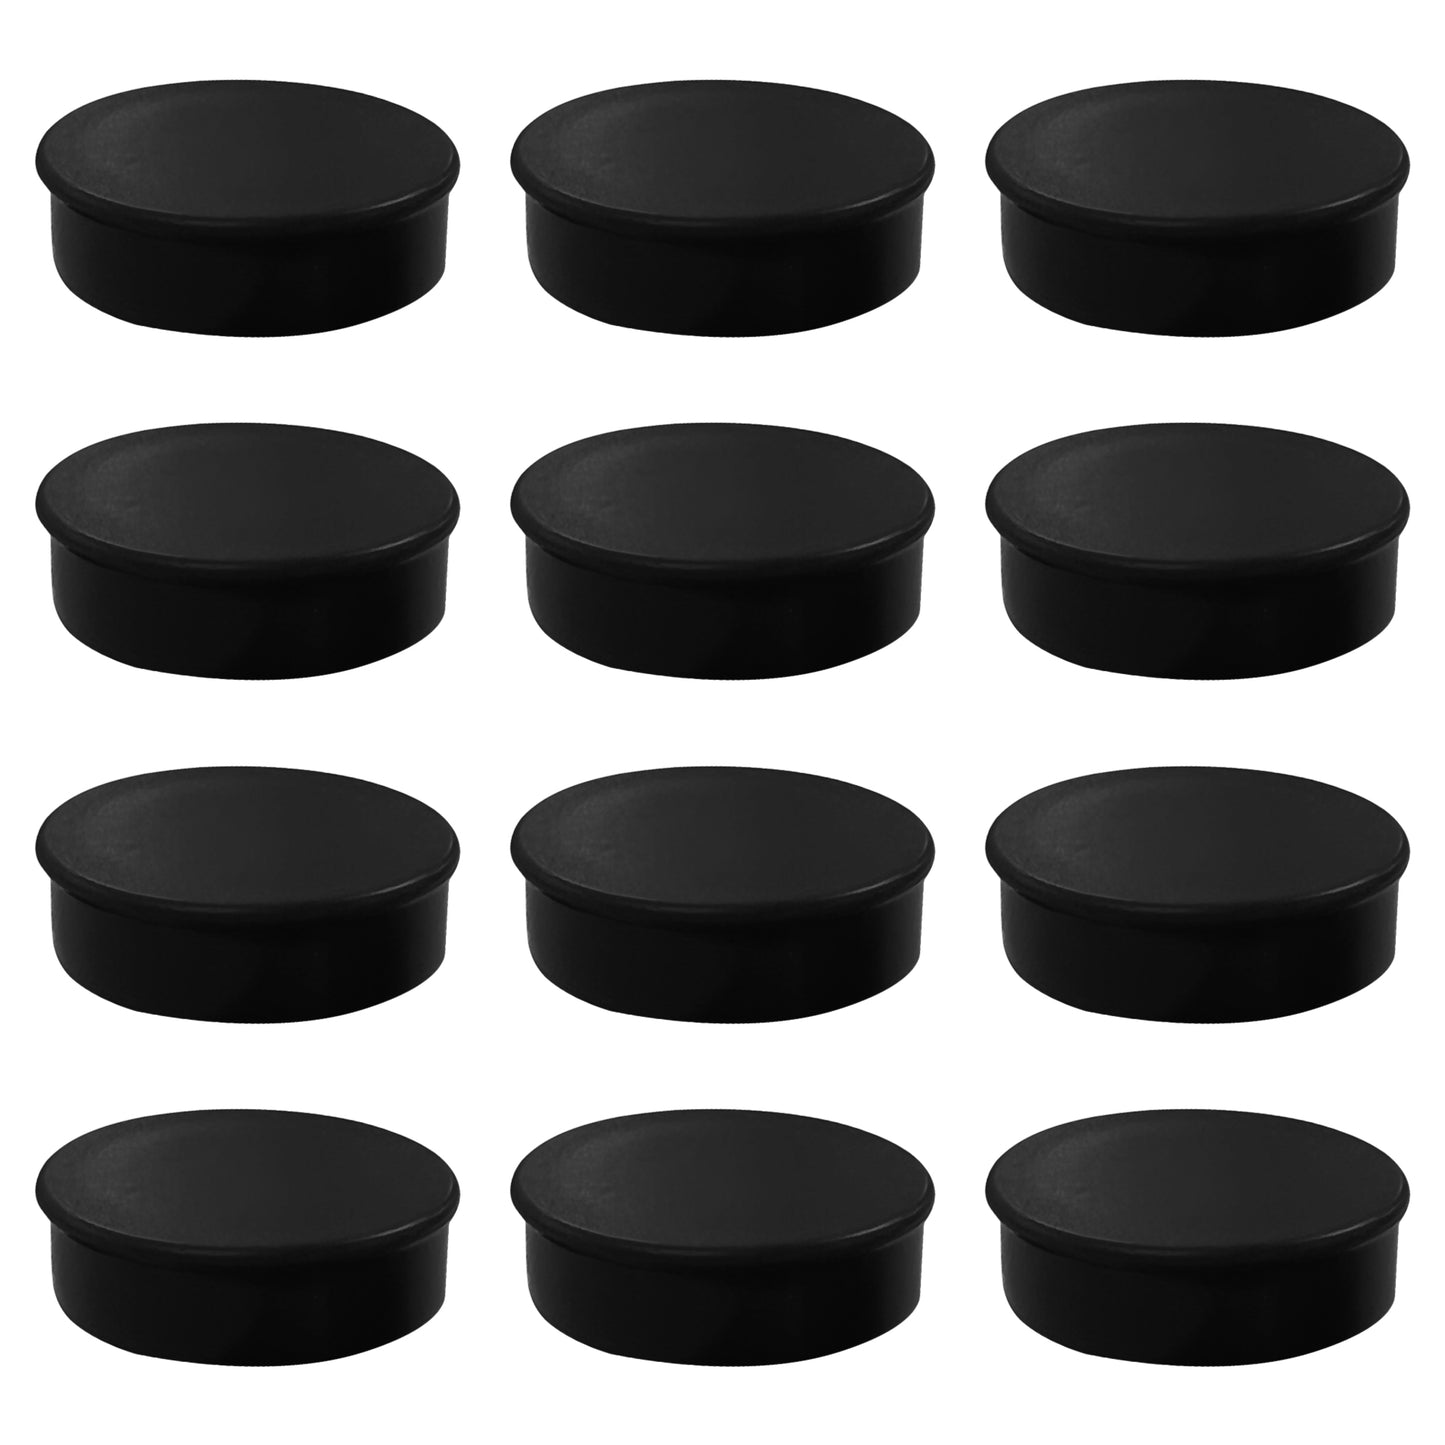 Pack of 36 Black Coloured Round Flat Magnets - 24mm Whiteboard Notice Board Office Fridge